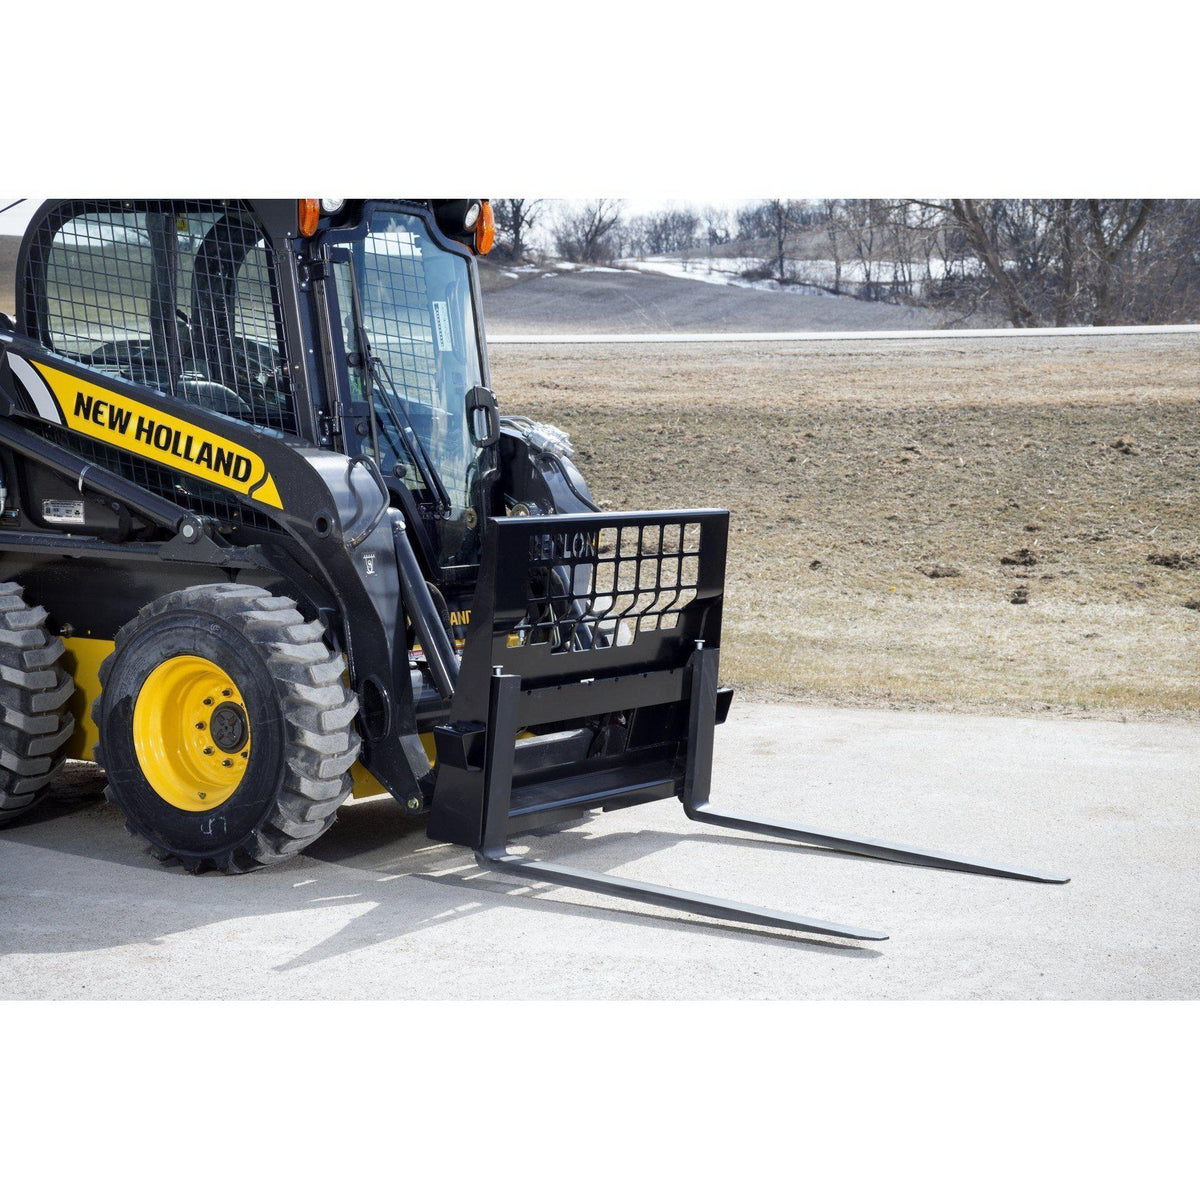 new holland skid steer in action with the heavy duty pallet forks from berlon